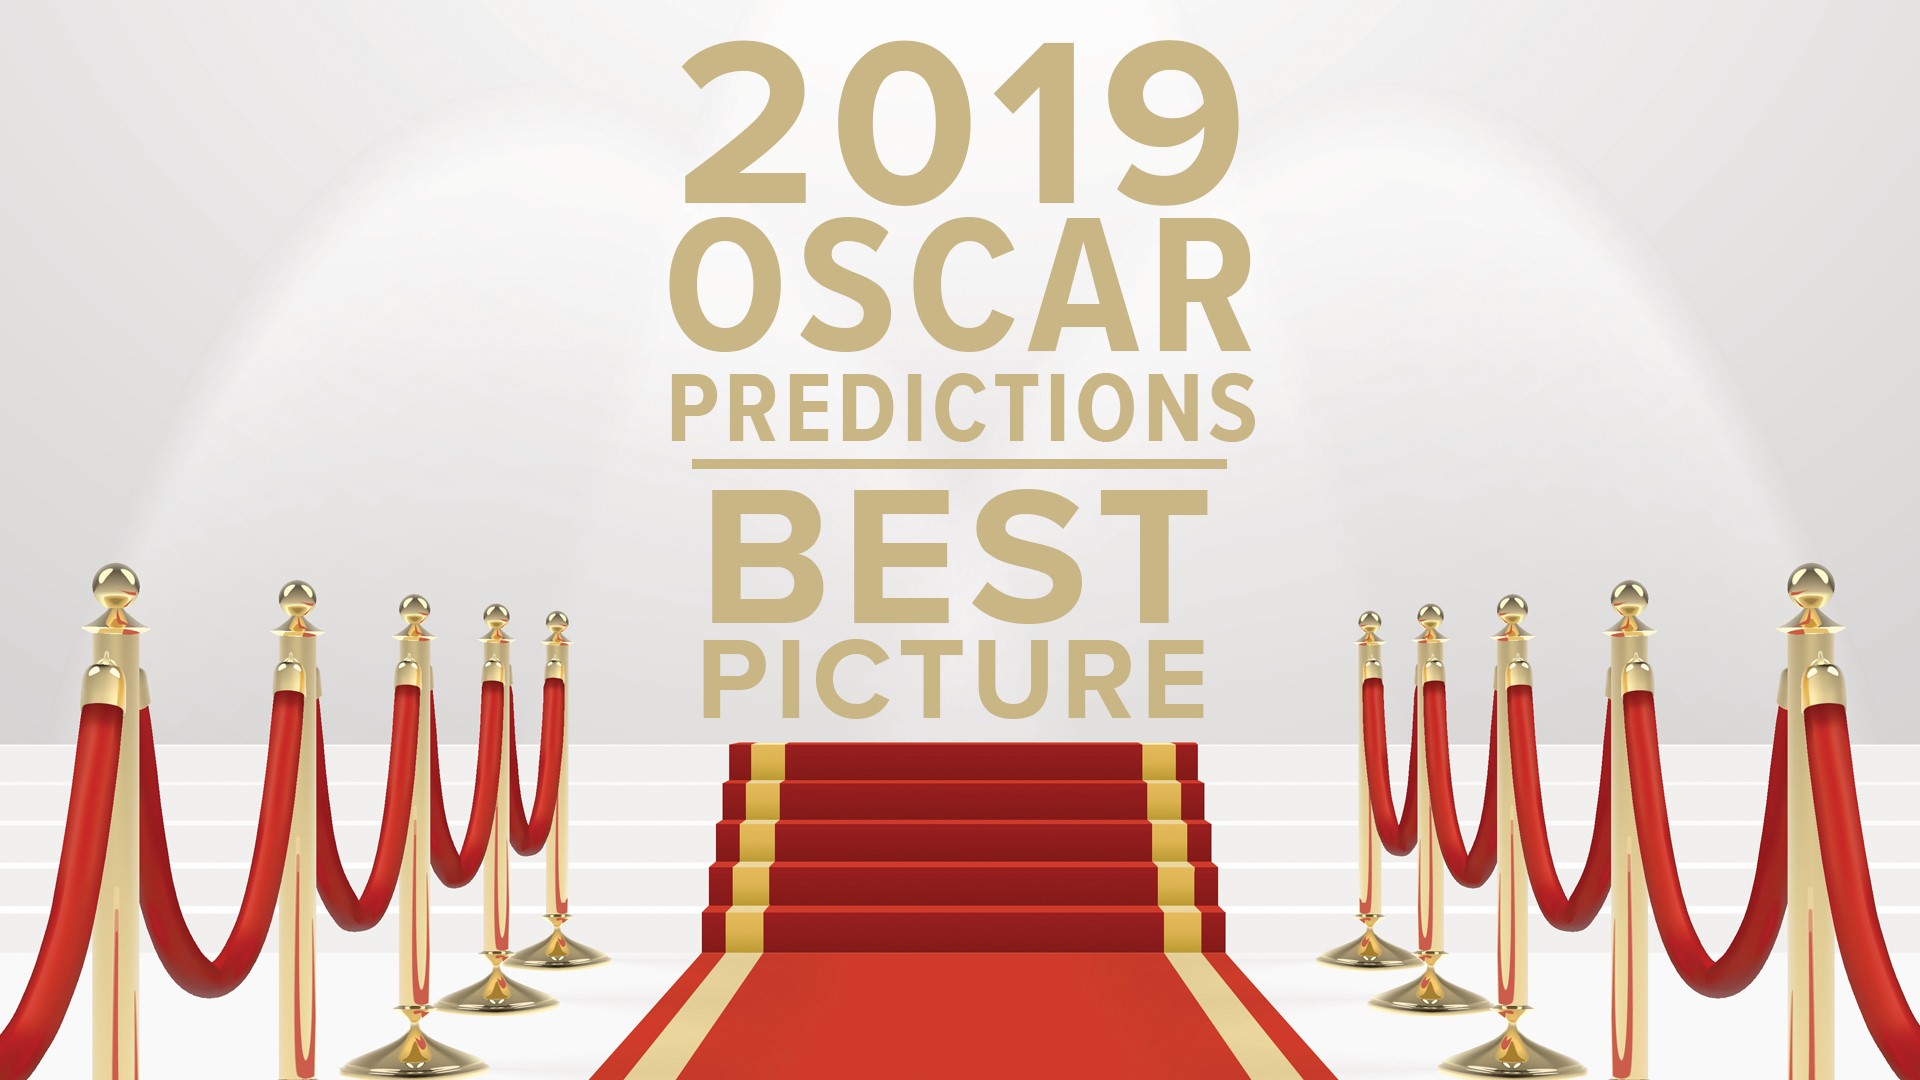 Before you fill out the ballot for your Oscars pool, Mark S. Allen breaks down the odds for the movies and offers his top pick. Academy Award Nominees: Black Panther, BlacKkKlansman, Bohemian Rhapsody, The Favourite, Green Book, Roma, A Star is Born, Vice. Also, hear from directors Ryan Coogler and Bradley Cooper. 20th Century Fox, Annapurna Pictures, Focus Features, Fox Searchlight Pictures, Netflix, Sony Pictures, Universal Pictures, Warner Bros. Pictures, Walt Disney Studios Motion Pictures.